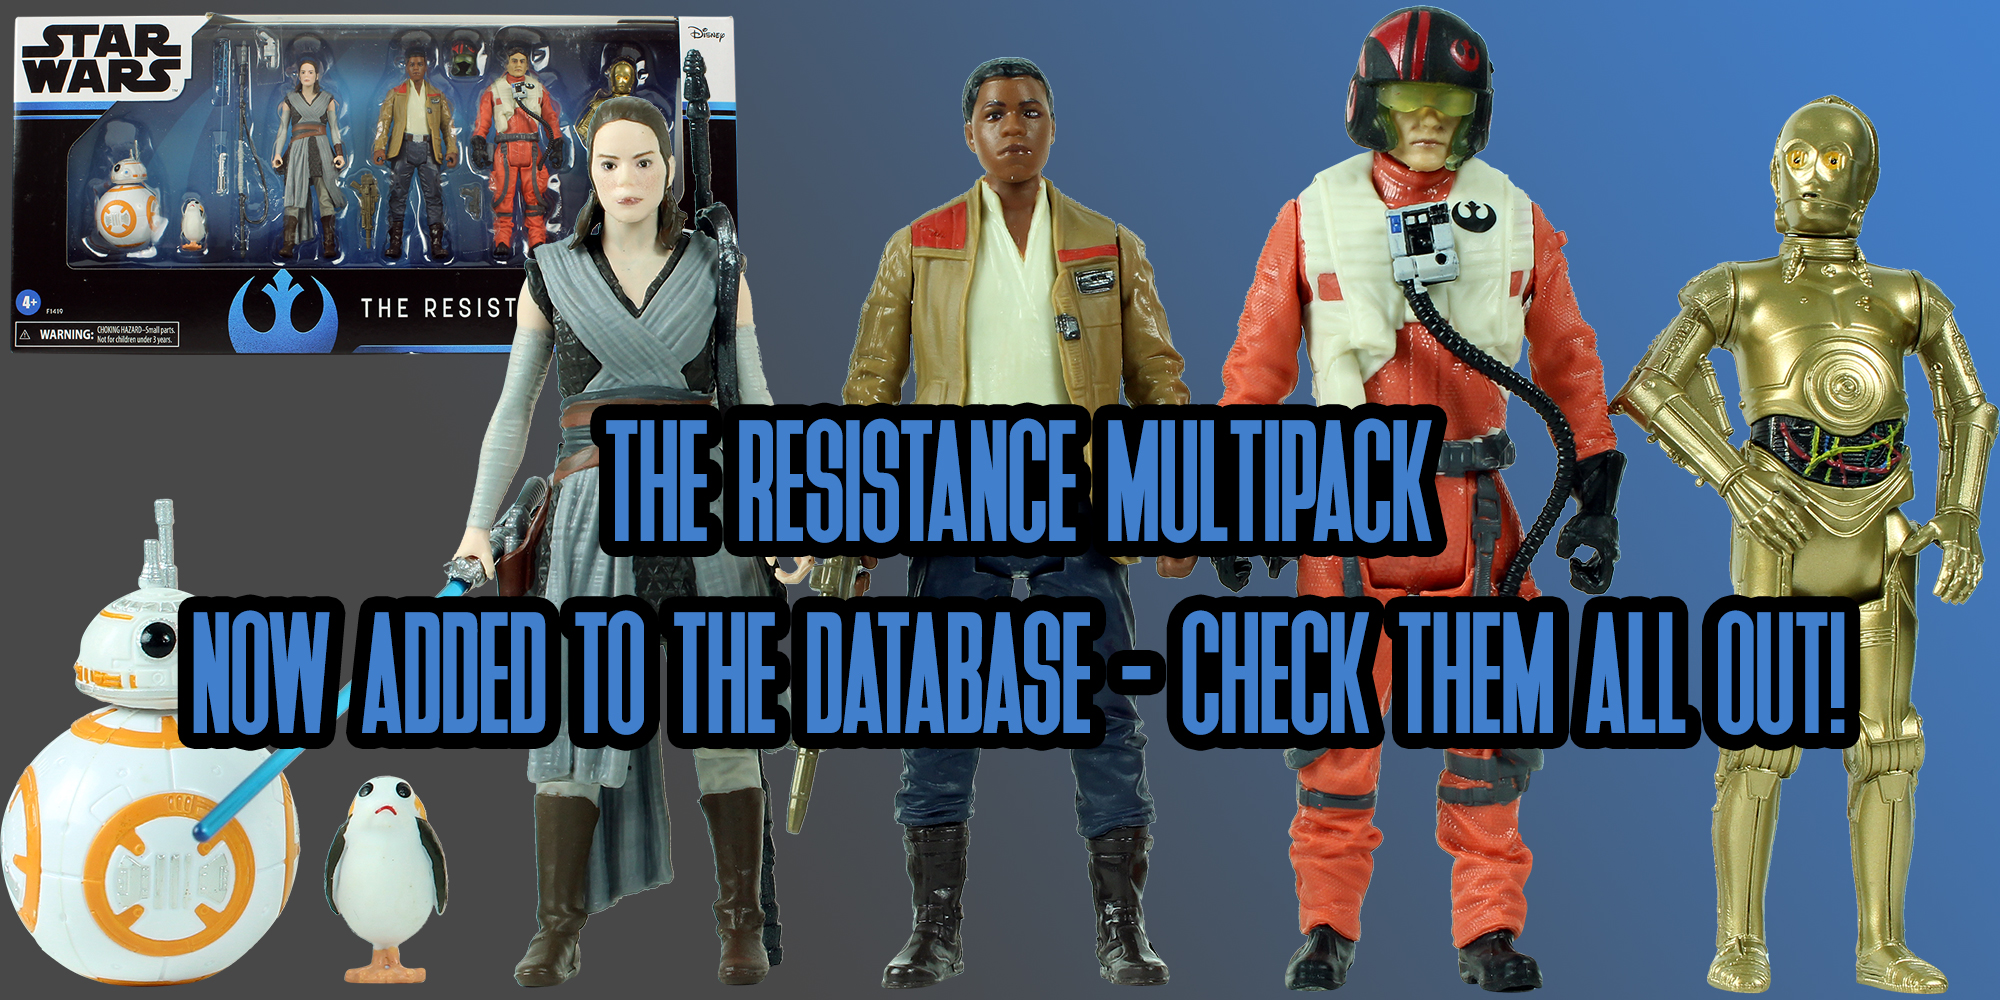 Celebrate The Saga - The Resistance - Added To The Database!